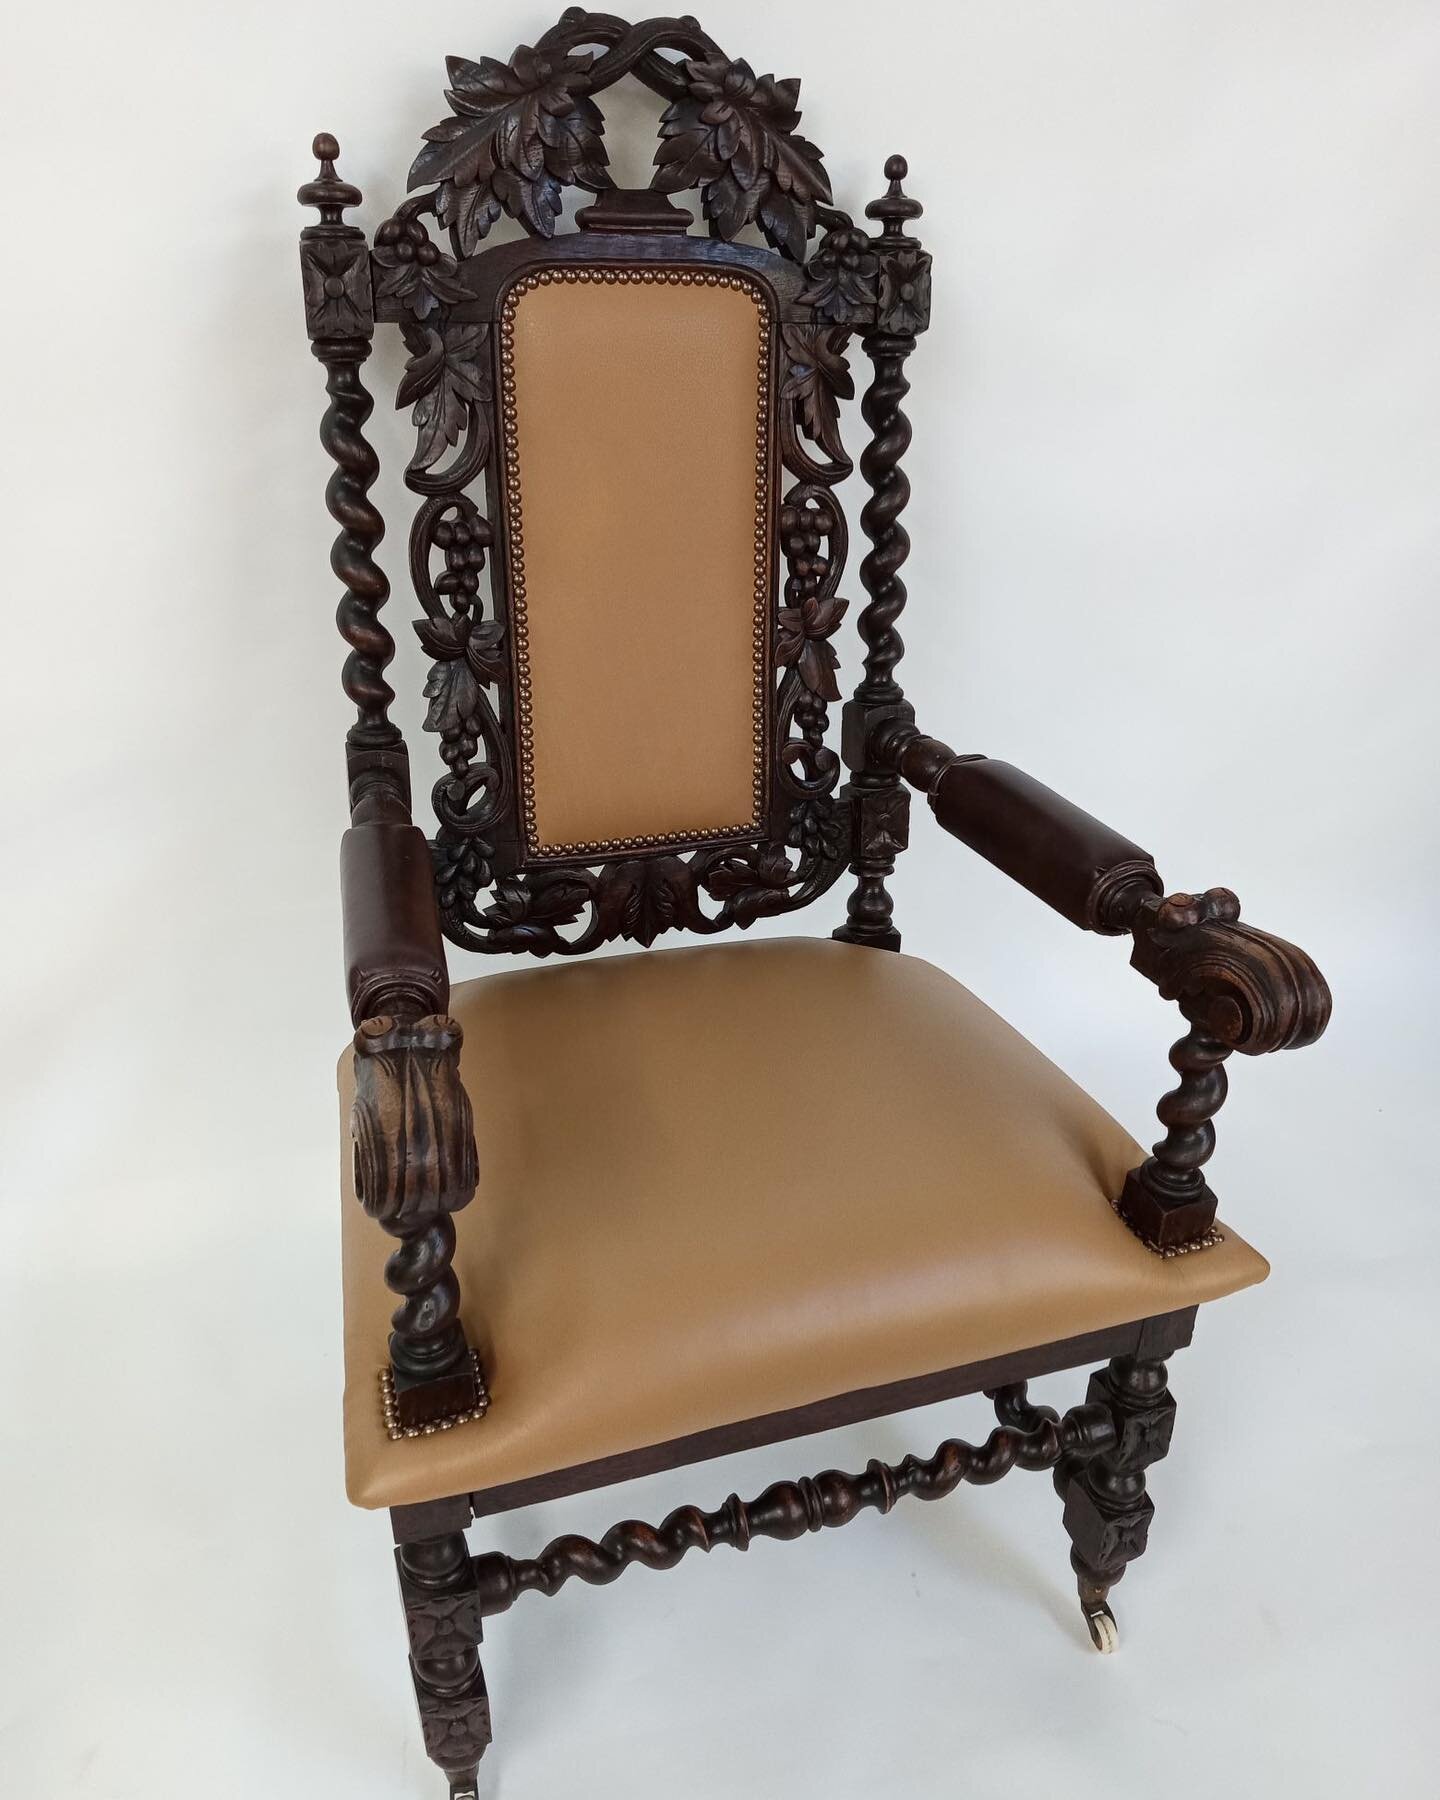 Here we have an antique chair that originally utilized cane in the seating area and back rest ,We teamed up with a local designer and replaced the outdated cane with new top grain leather on the arms , seating area and back rest . 

#houstoninteriord